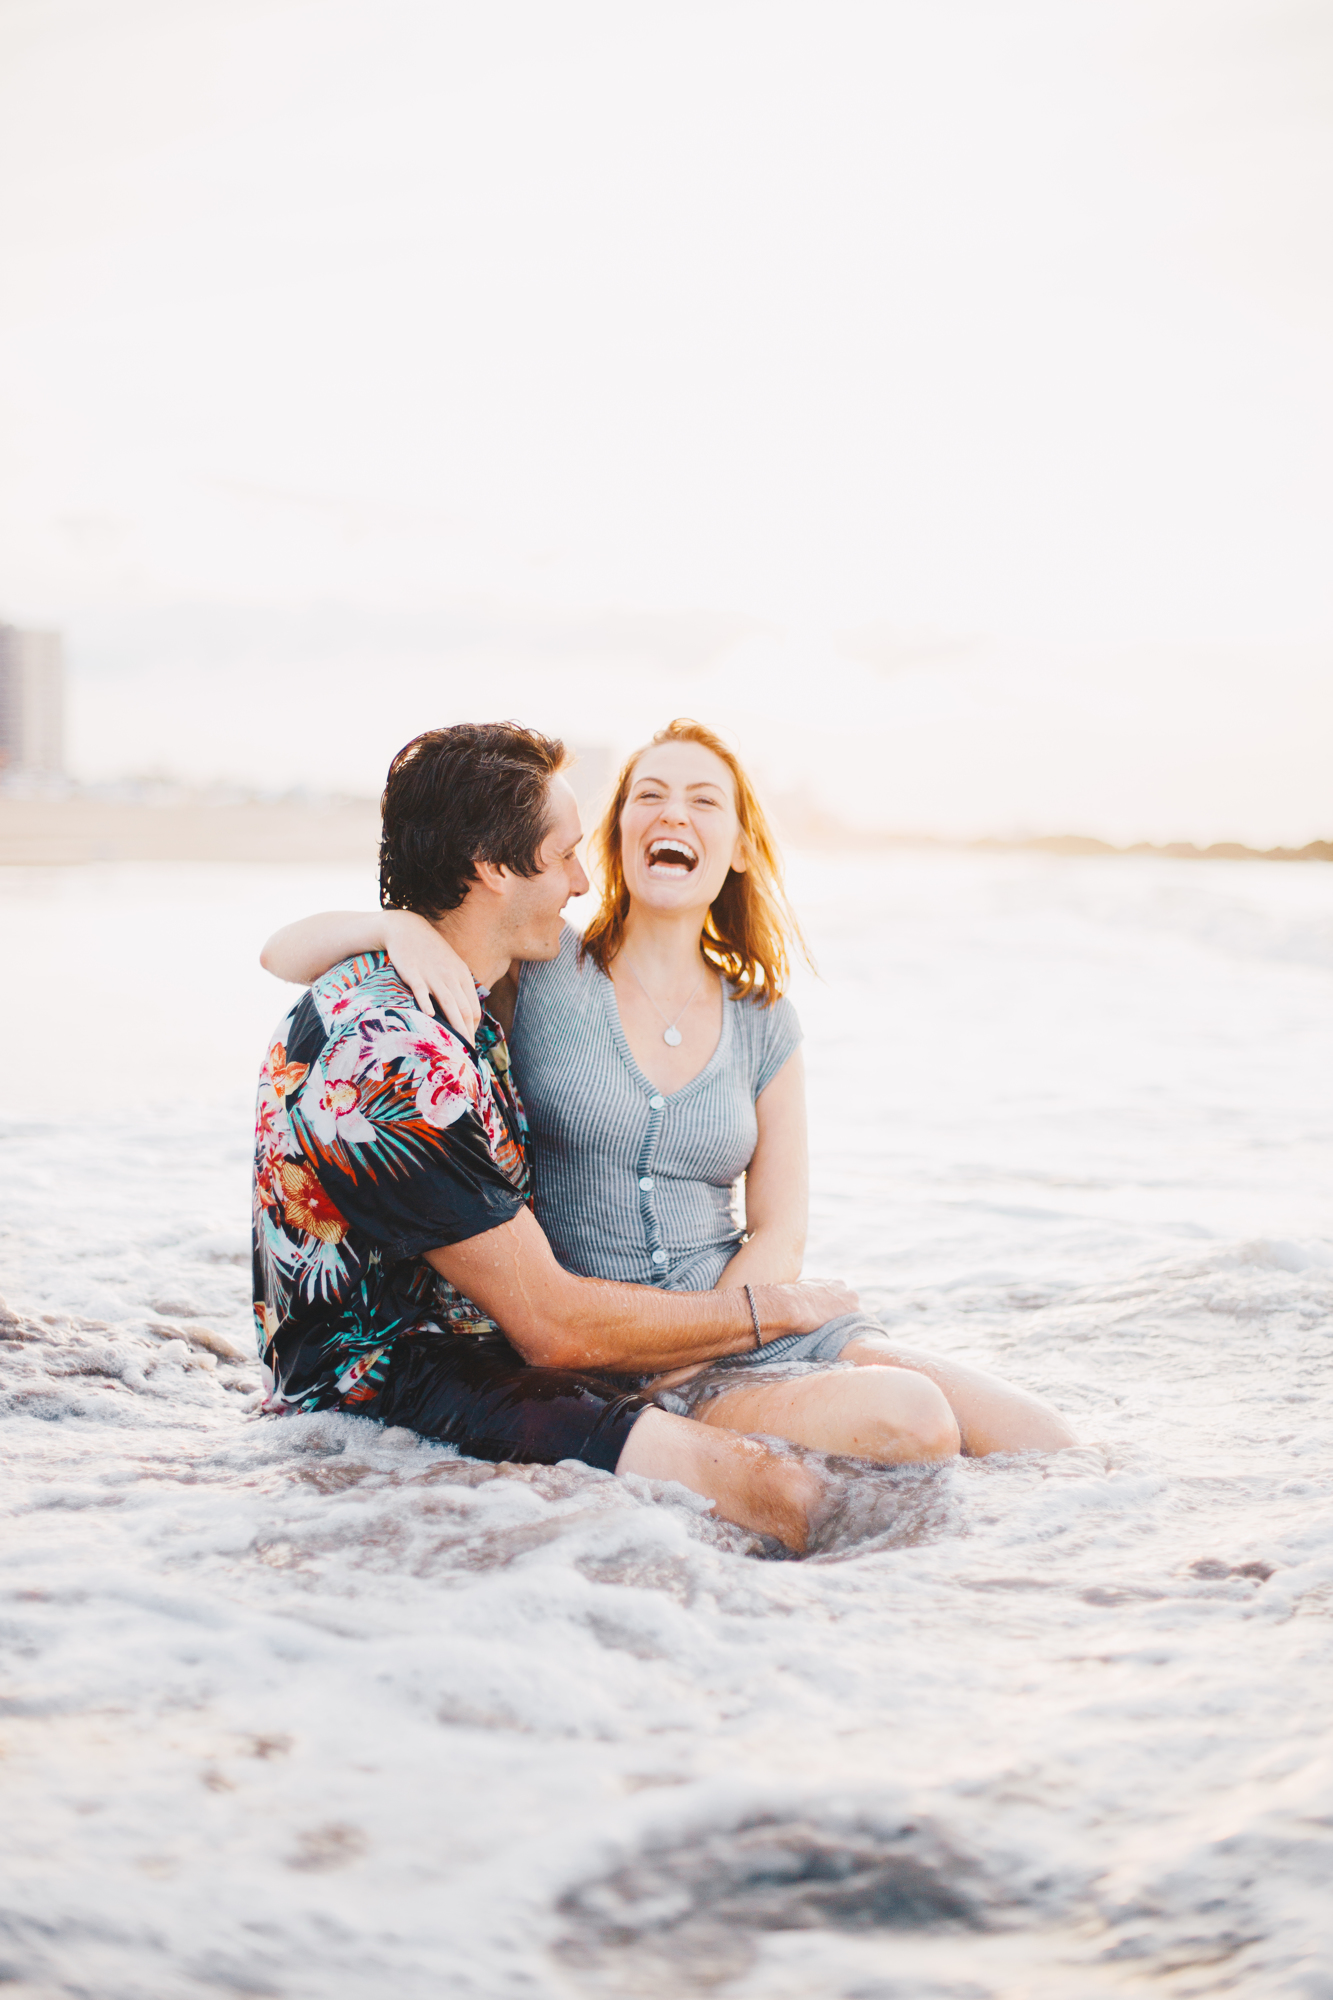 Glowing Sunrise Engagement Photos on the Beach at Coney Island